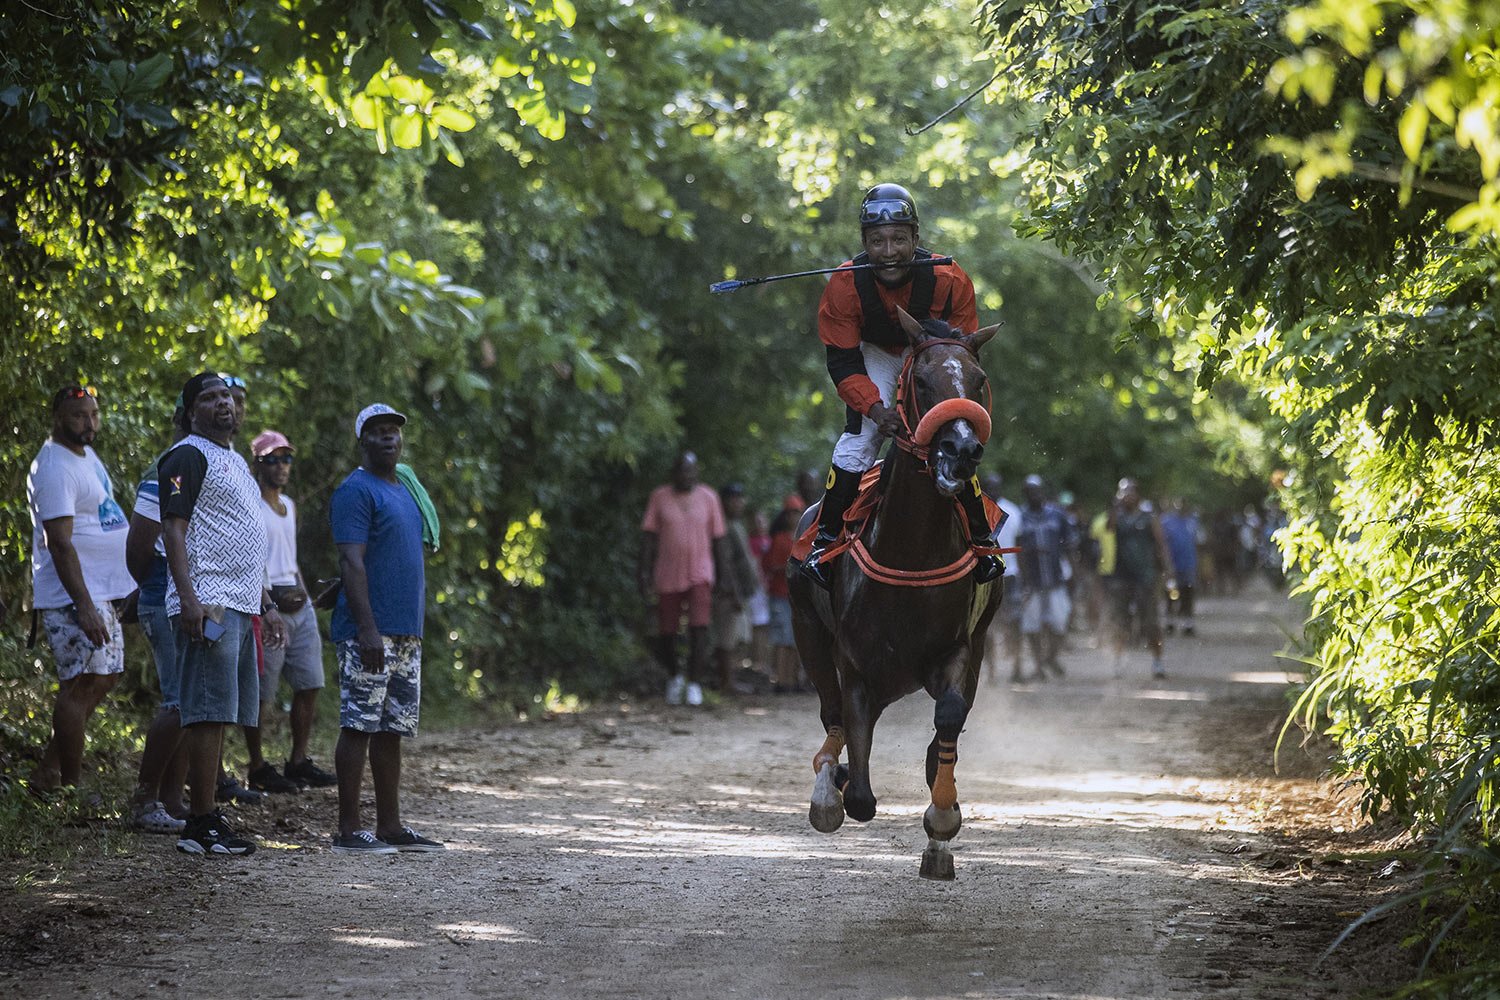  Racehorse Chelsea finishes last, after rival Dubai, in a two-horse race on San Andres Island in Colombia, Saturday, Nov. 12, 2022. There’s no racetrack on the tiny Caribbean island of San Andres, but passion for horse racing runs deep. (AP Photo/Iva